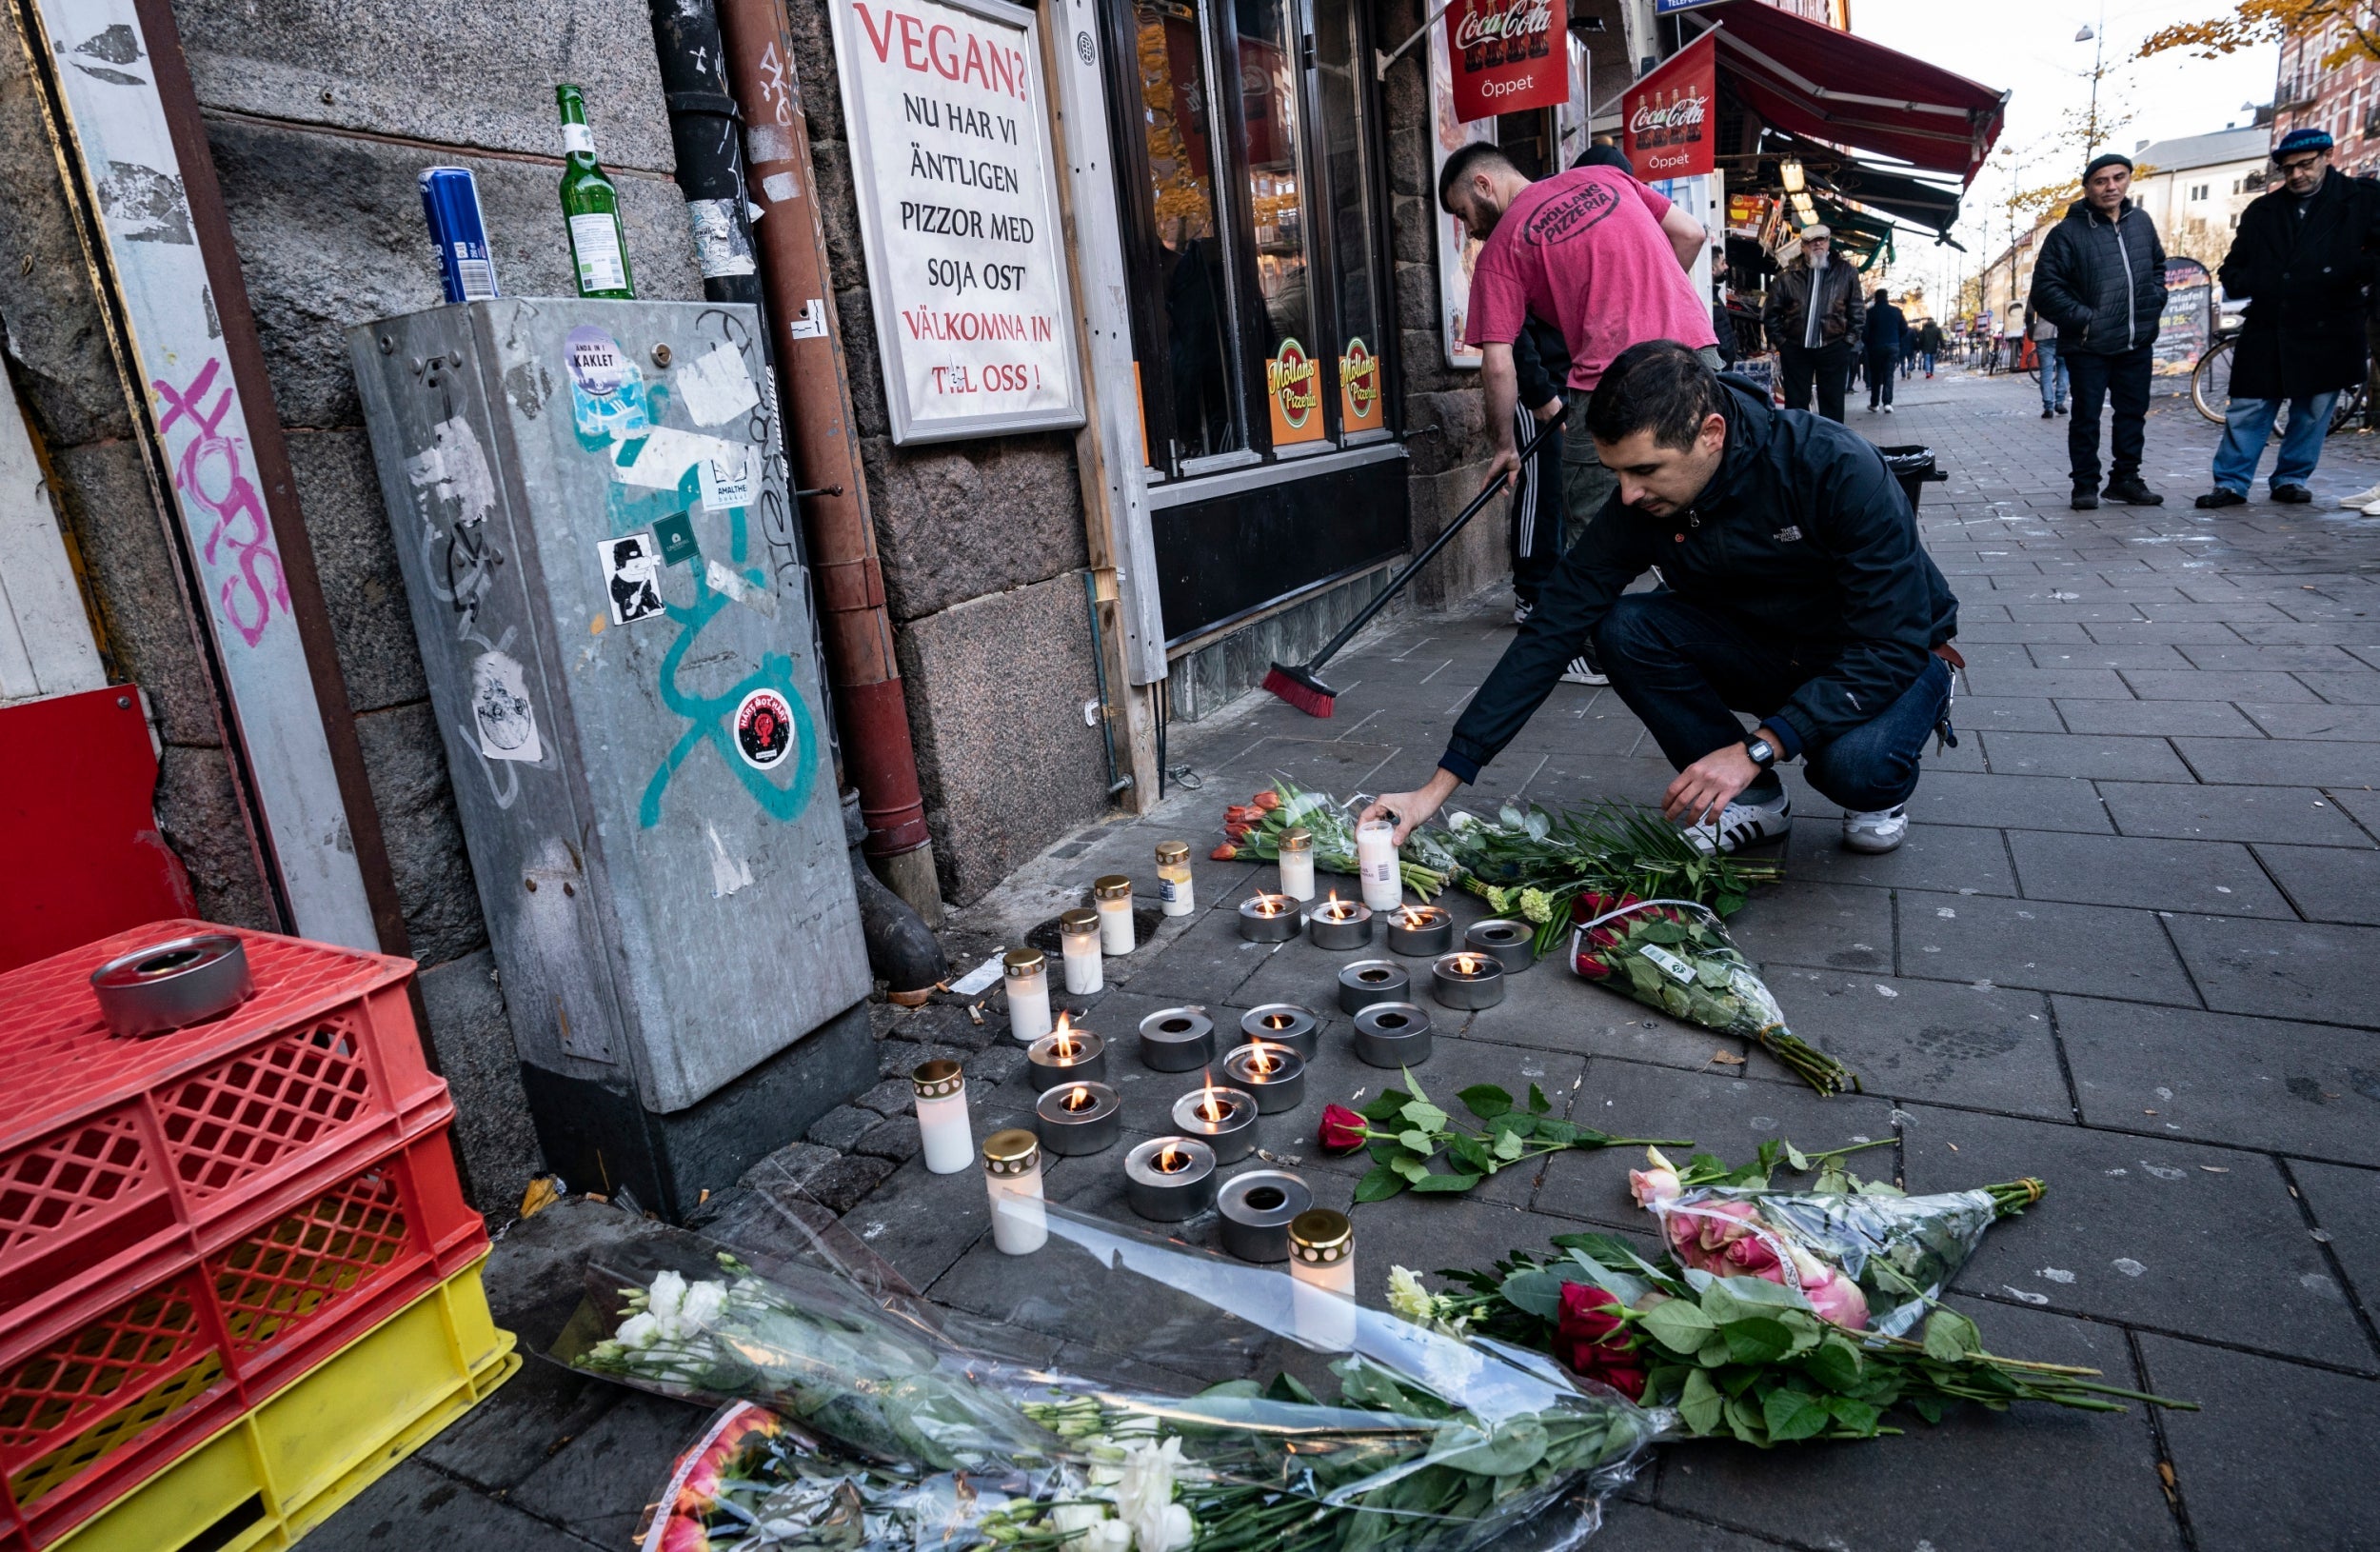 A man places flowers in tribute to victims of a shooting while a restaurant employee sweeps broken glass at the crime scene in Malmo, Sweden